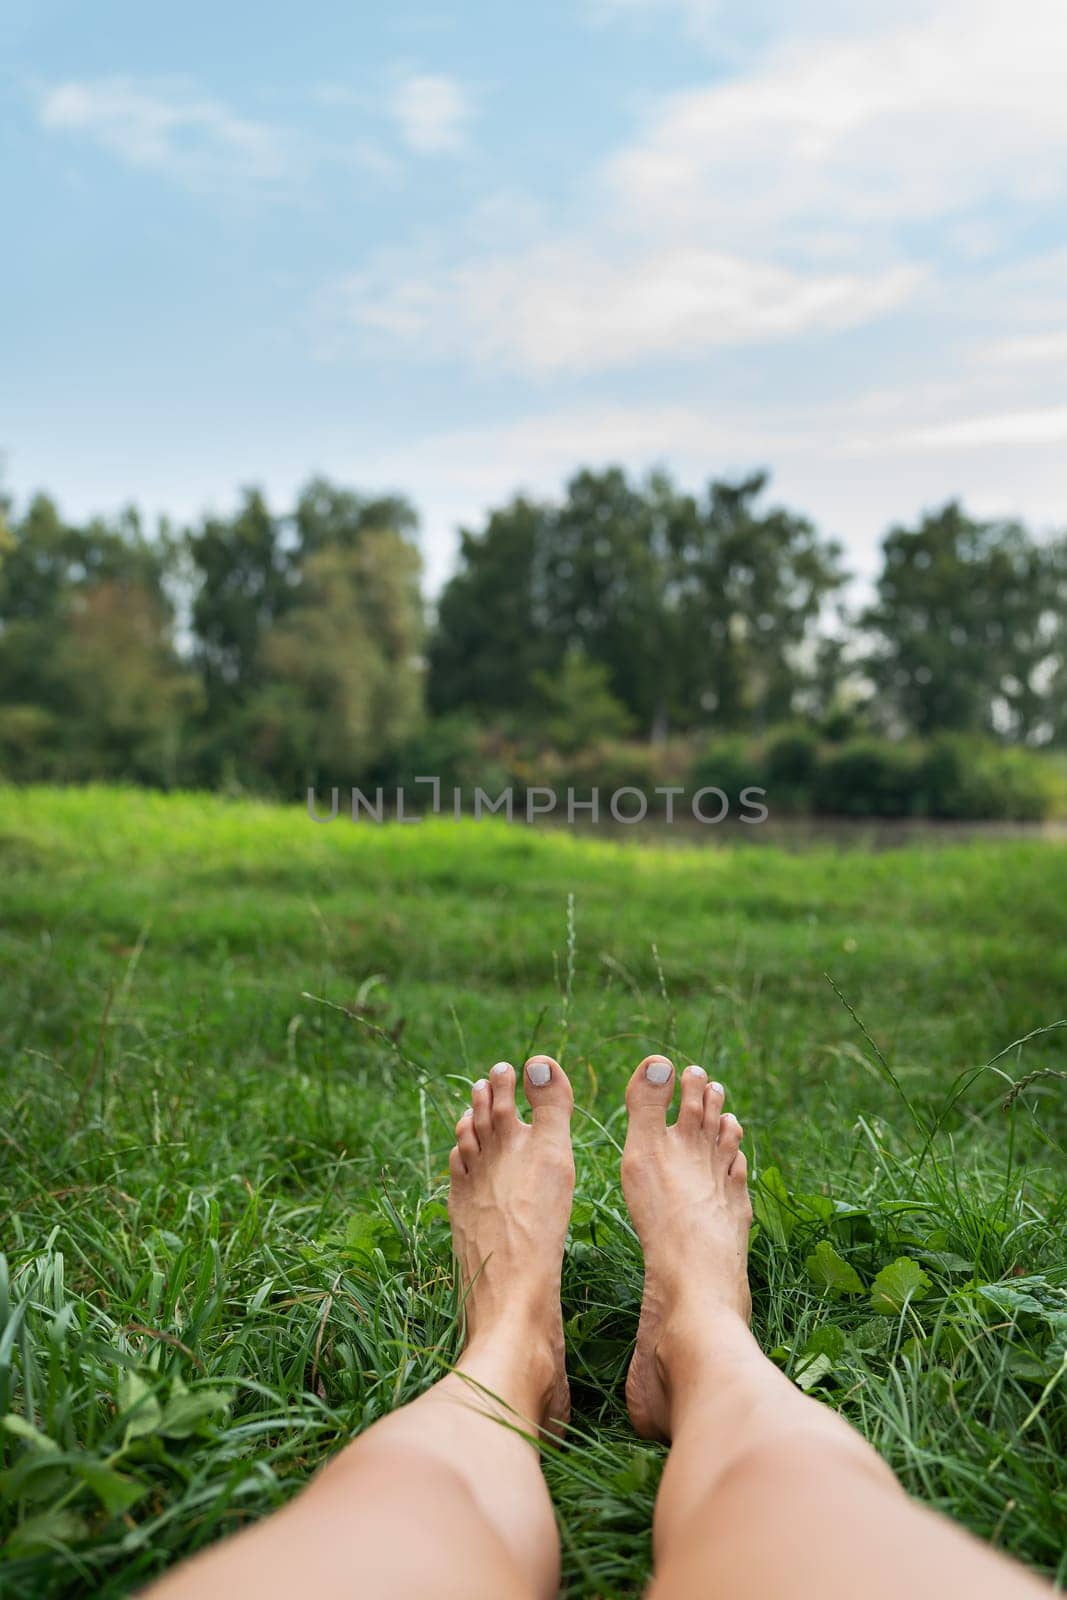 The image shows a pair of bare feet lying on a grassy field with a lake and a green park in the background. Toes point upward. The image is peaceful and calm